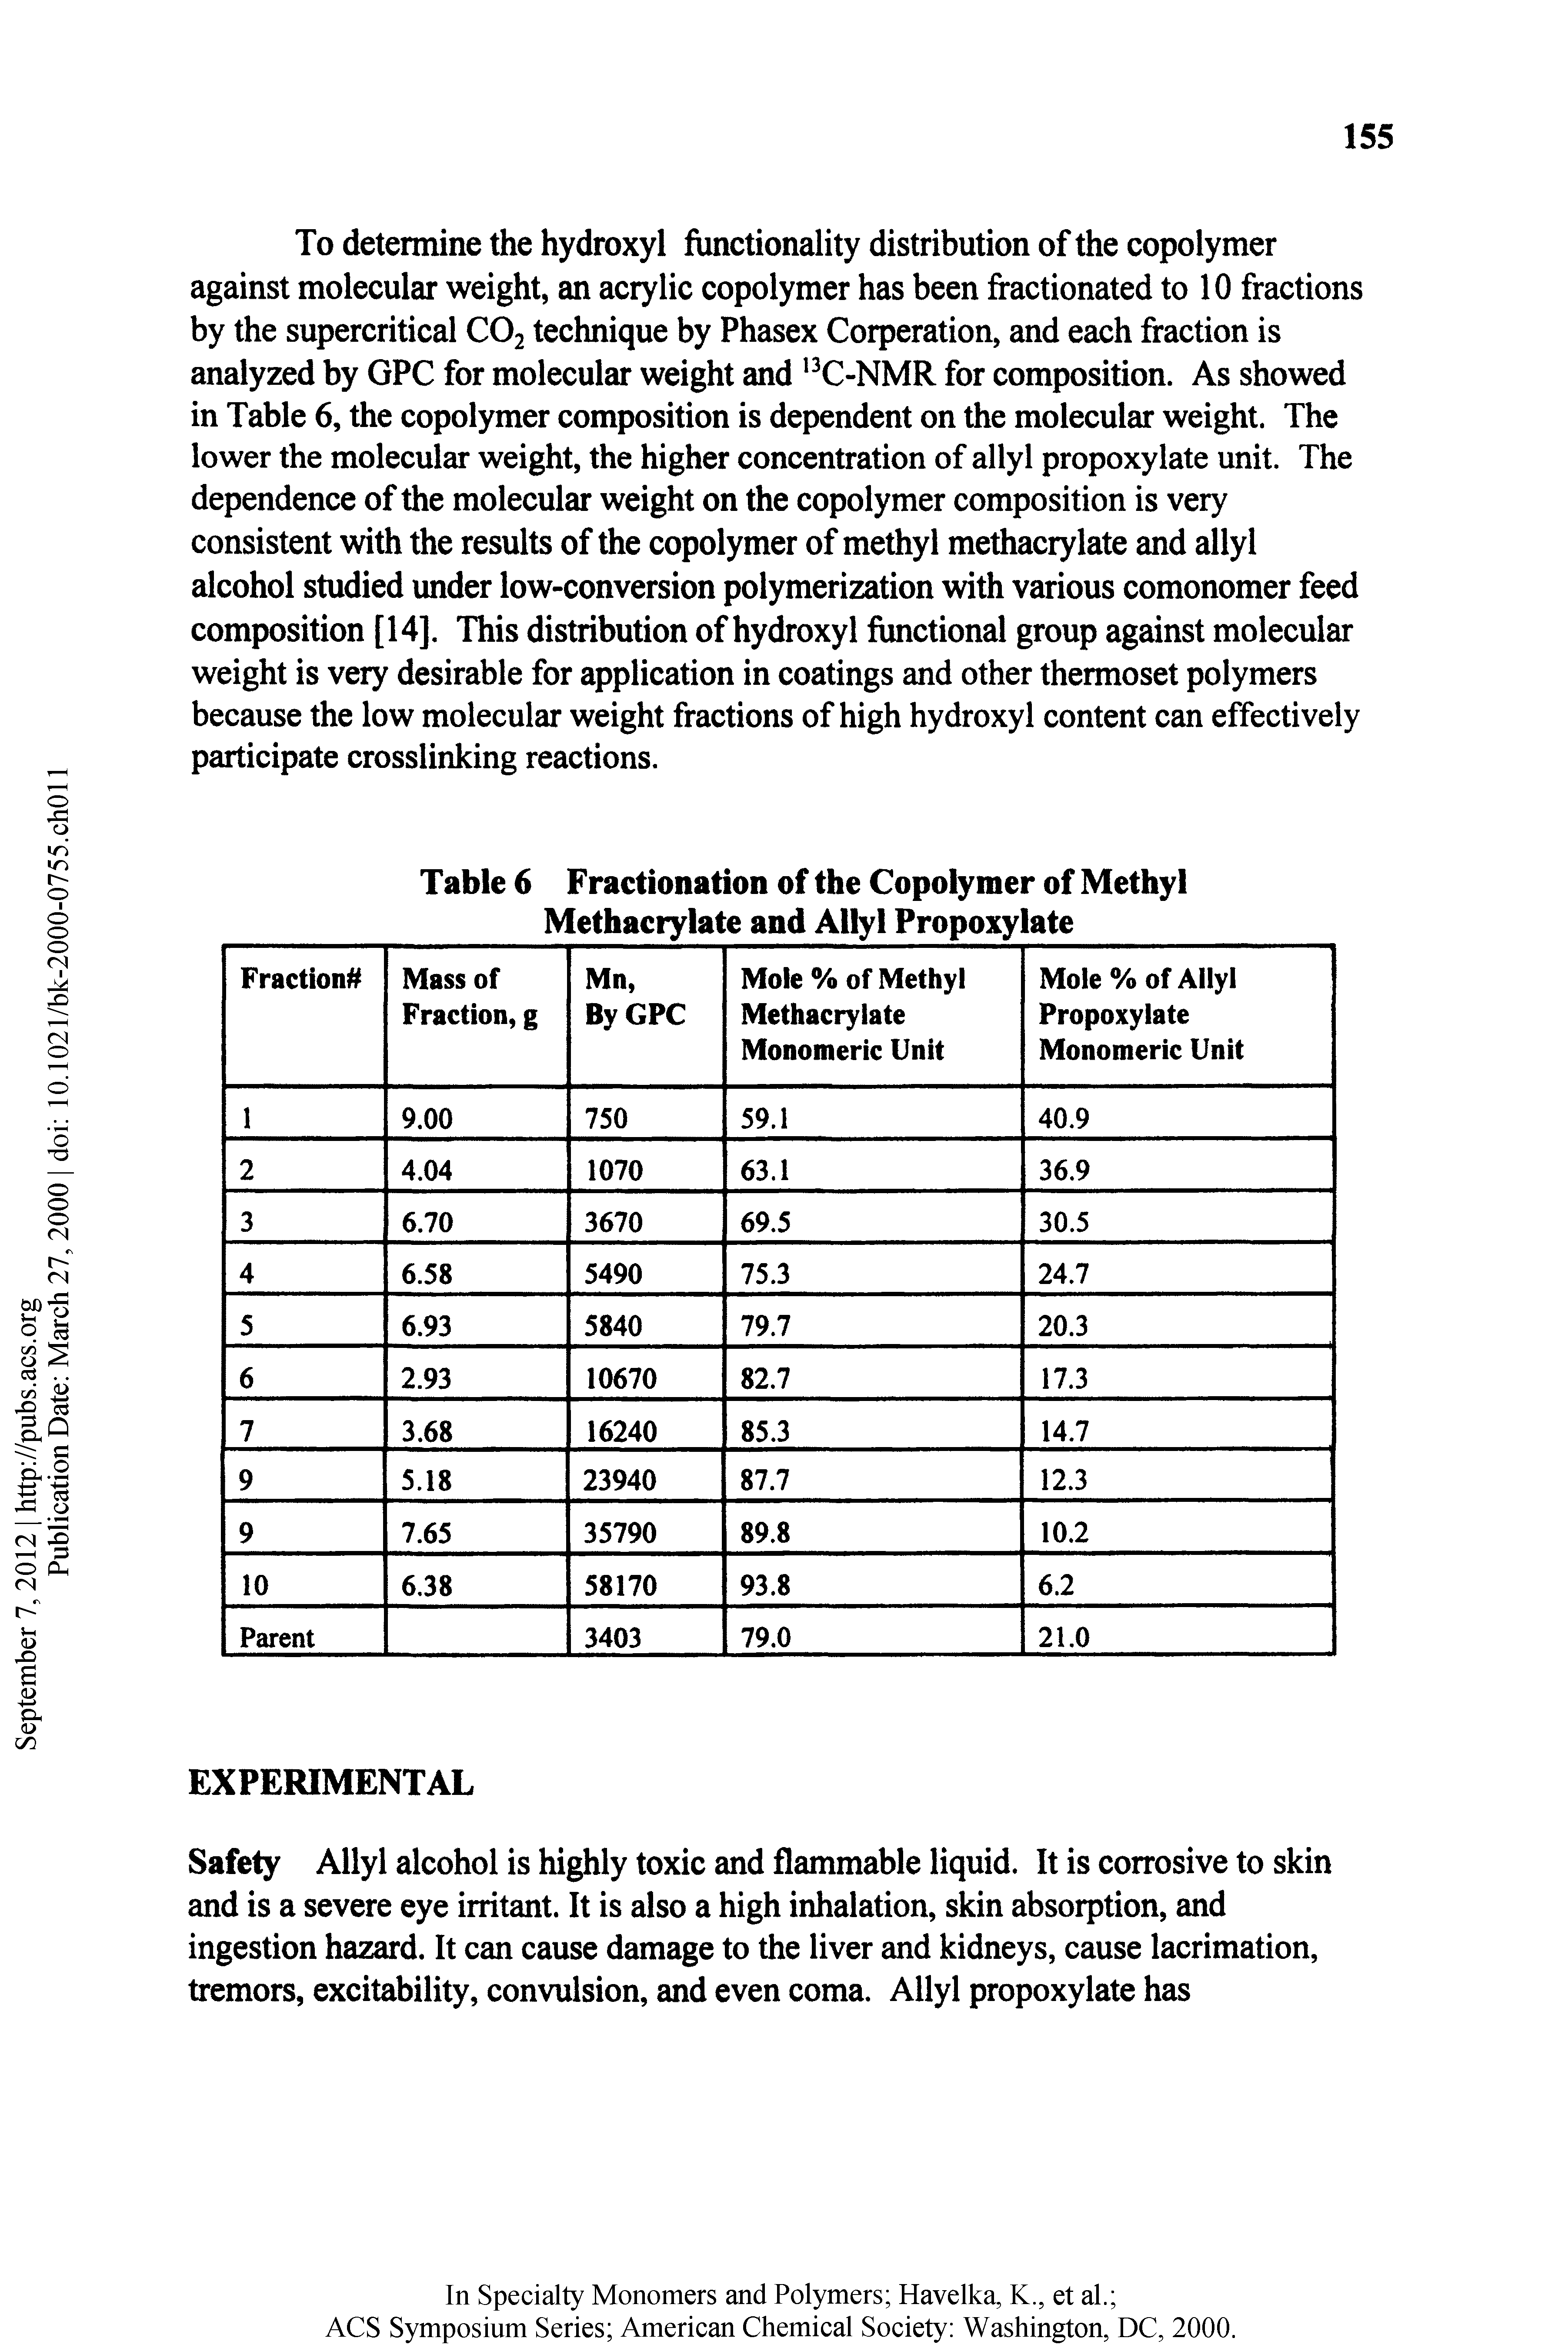 Table 6 Fractionation of the Copolymer of Methyl Methacrylate and Allyl Propoxylate...